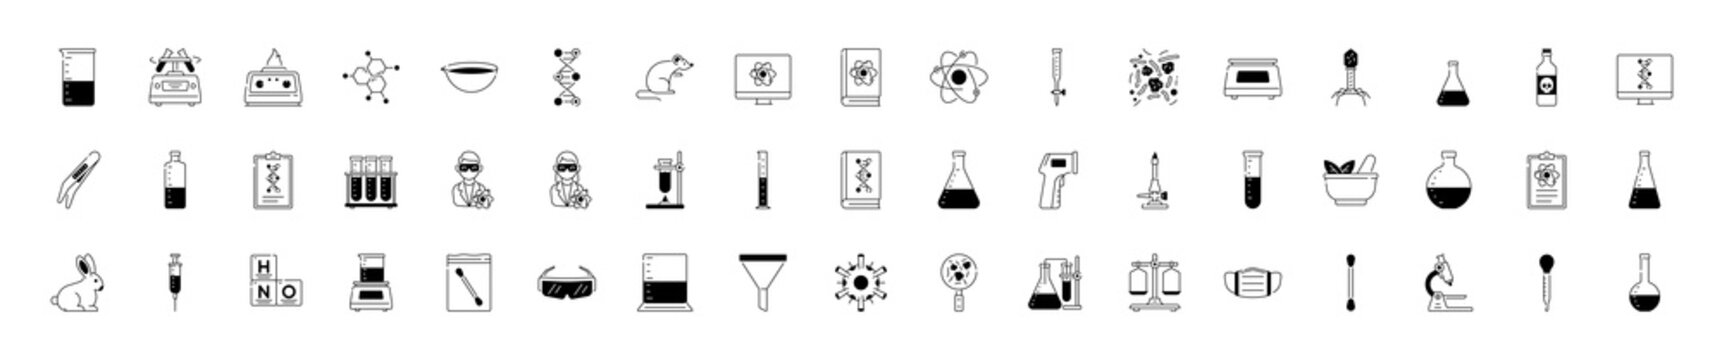 Science lab and disease prevention signs. Medical healthcare, doctor icons. Chemical formula, medical doctor research, chemistry testing lab icons. Vector illustration